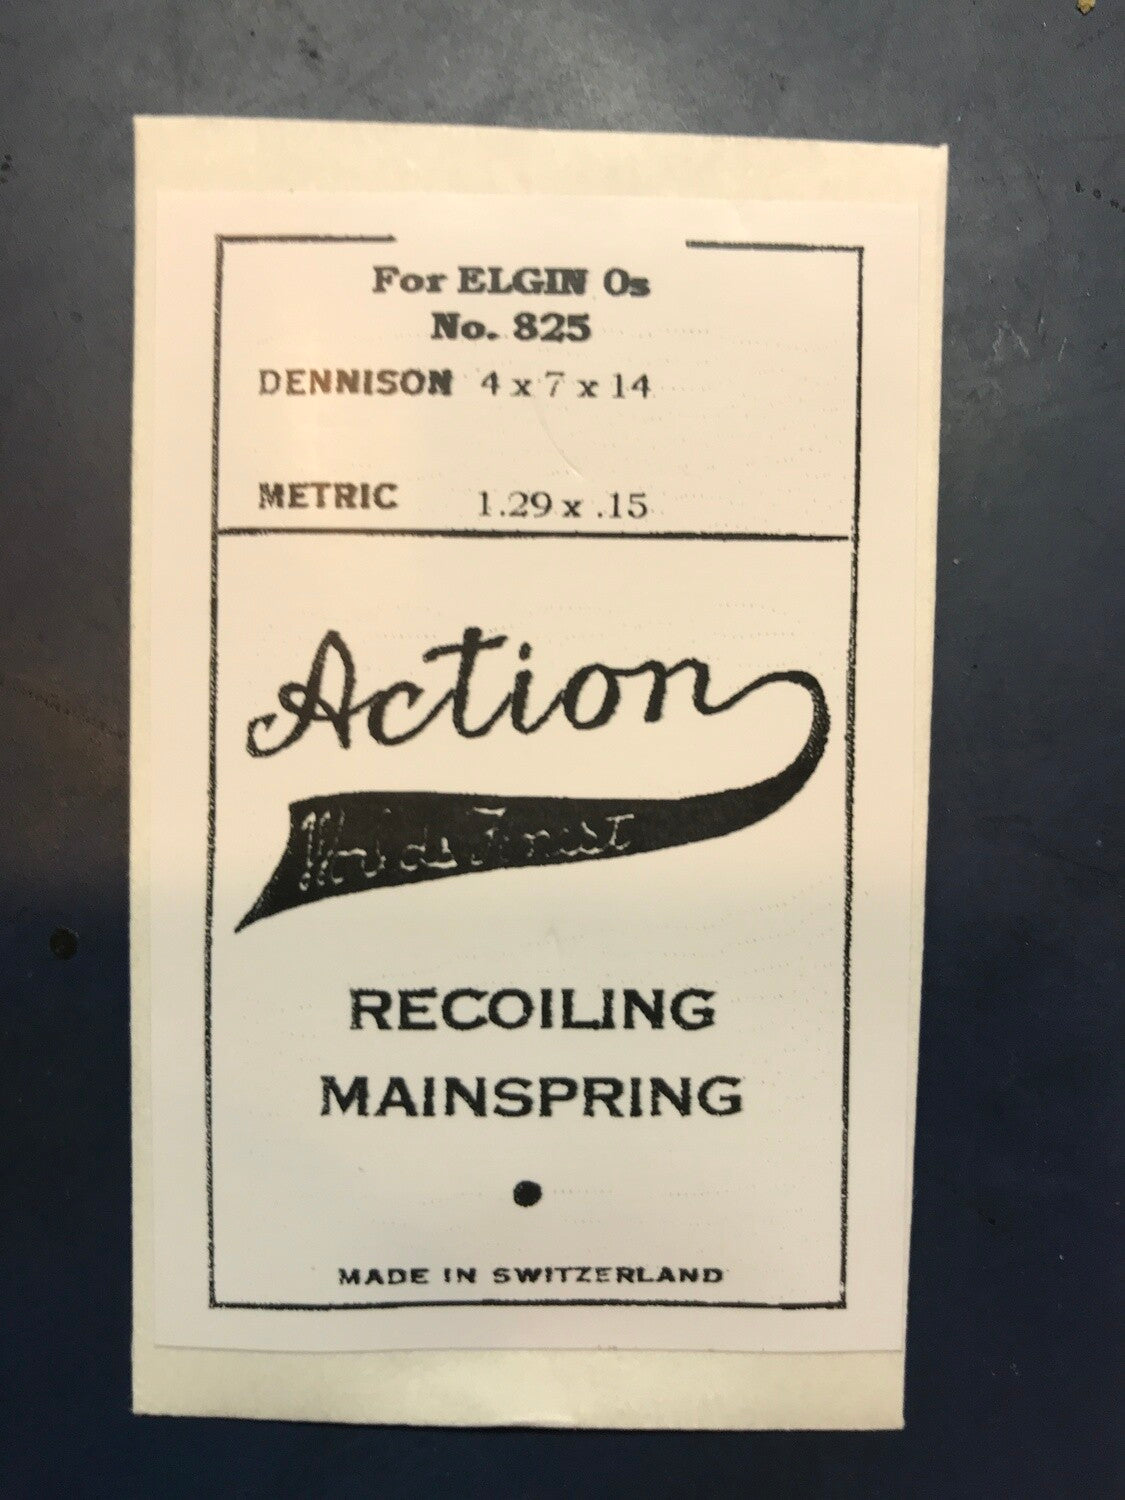 Action Mainspring for 0s Elgin No. 825 - Steel